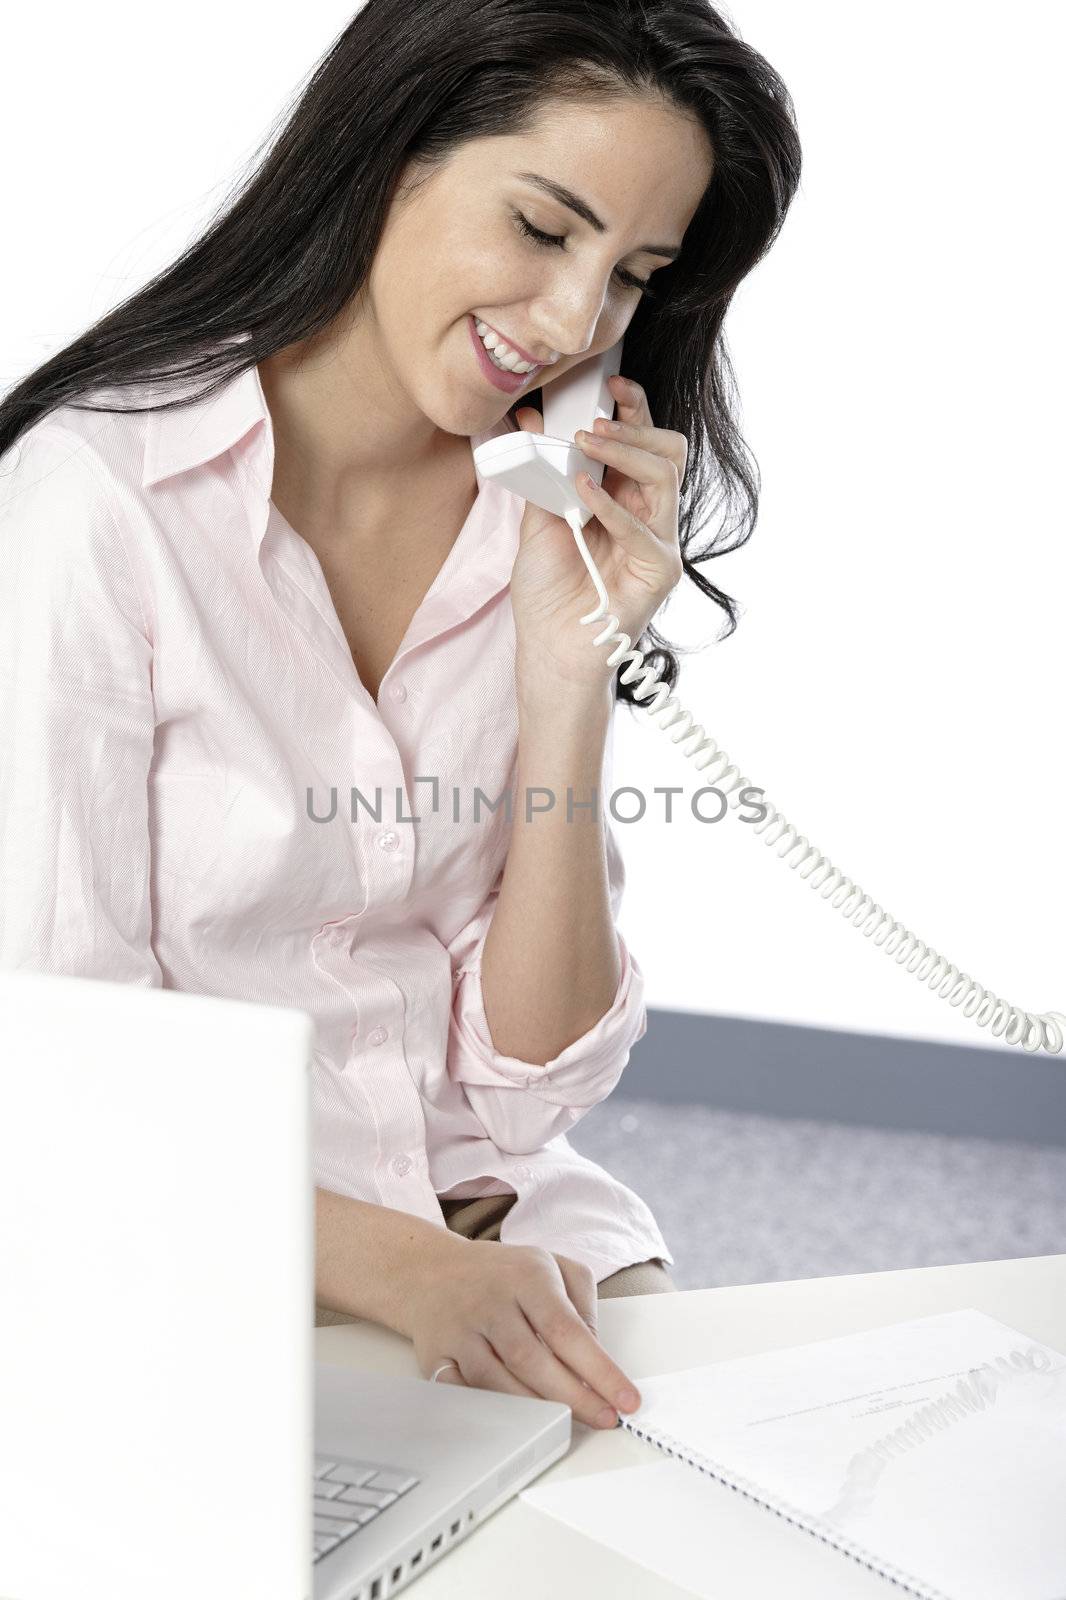 Woman on the phone at work by studiofi